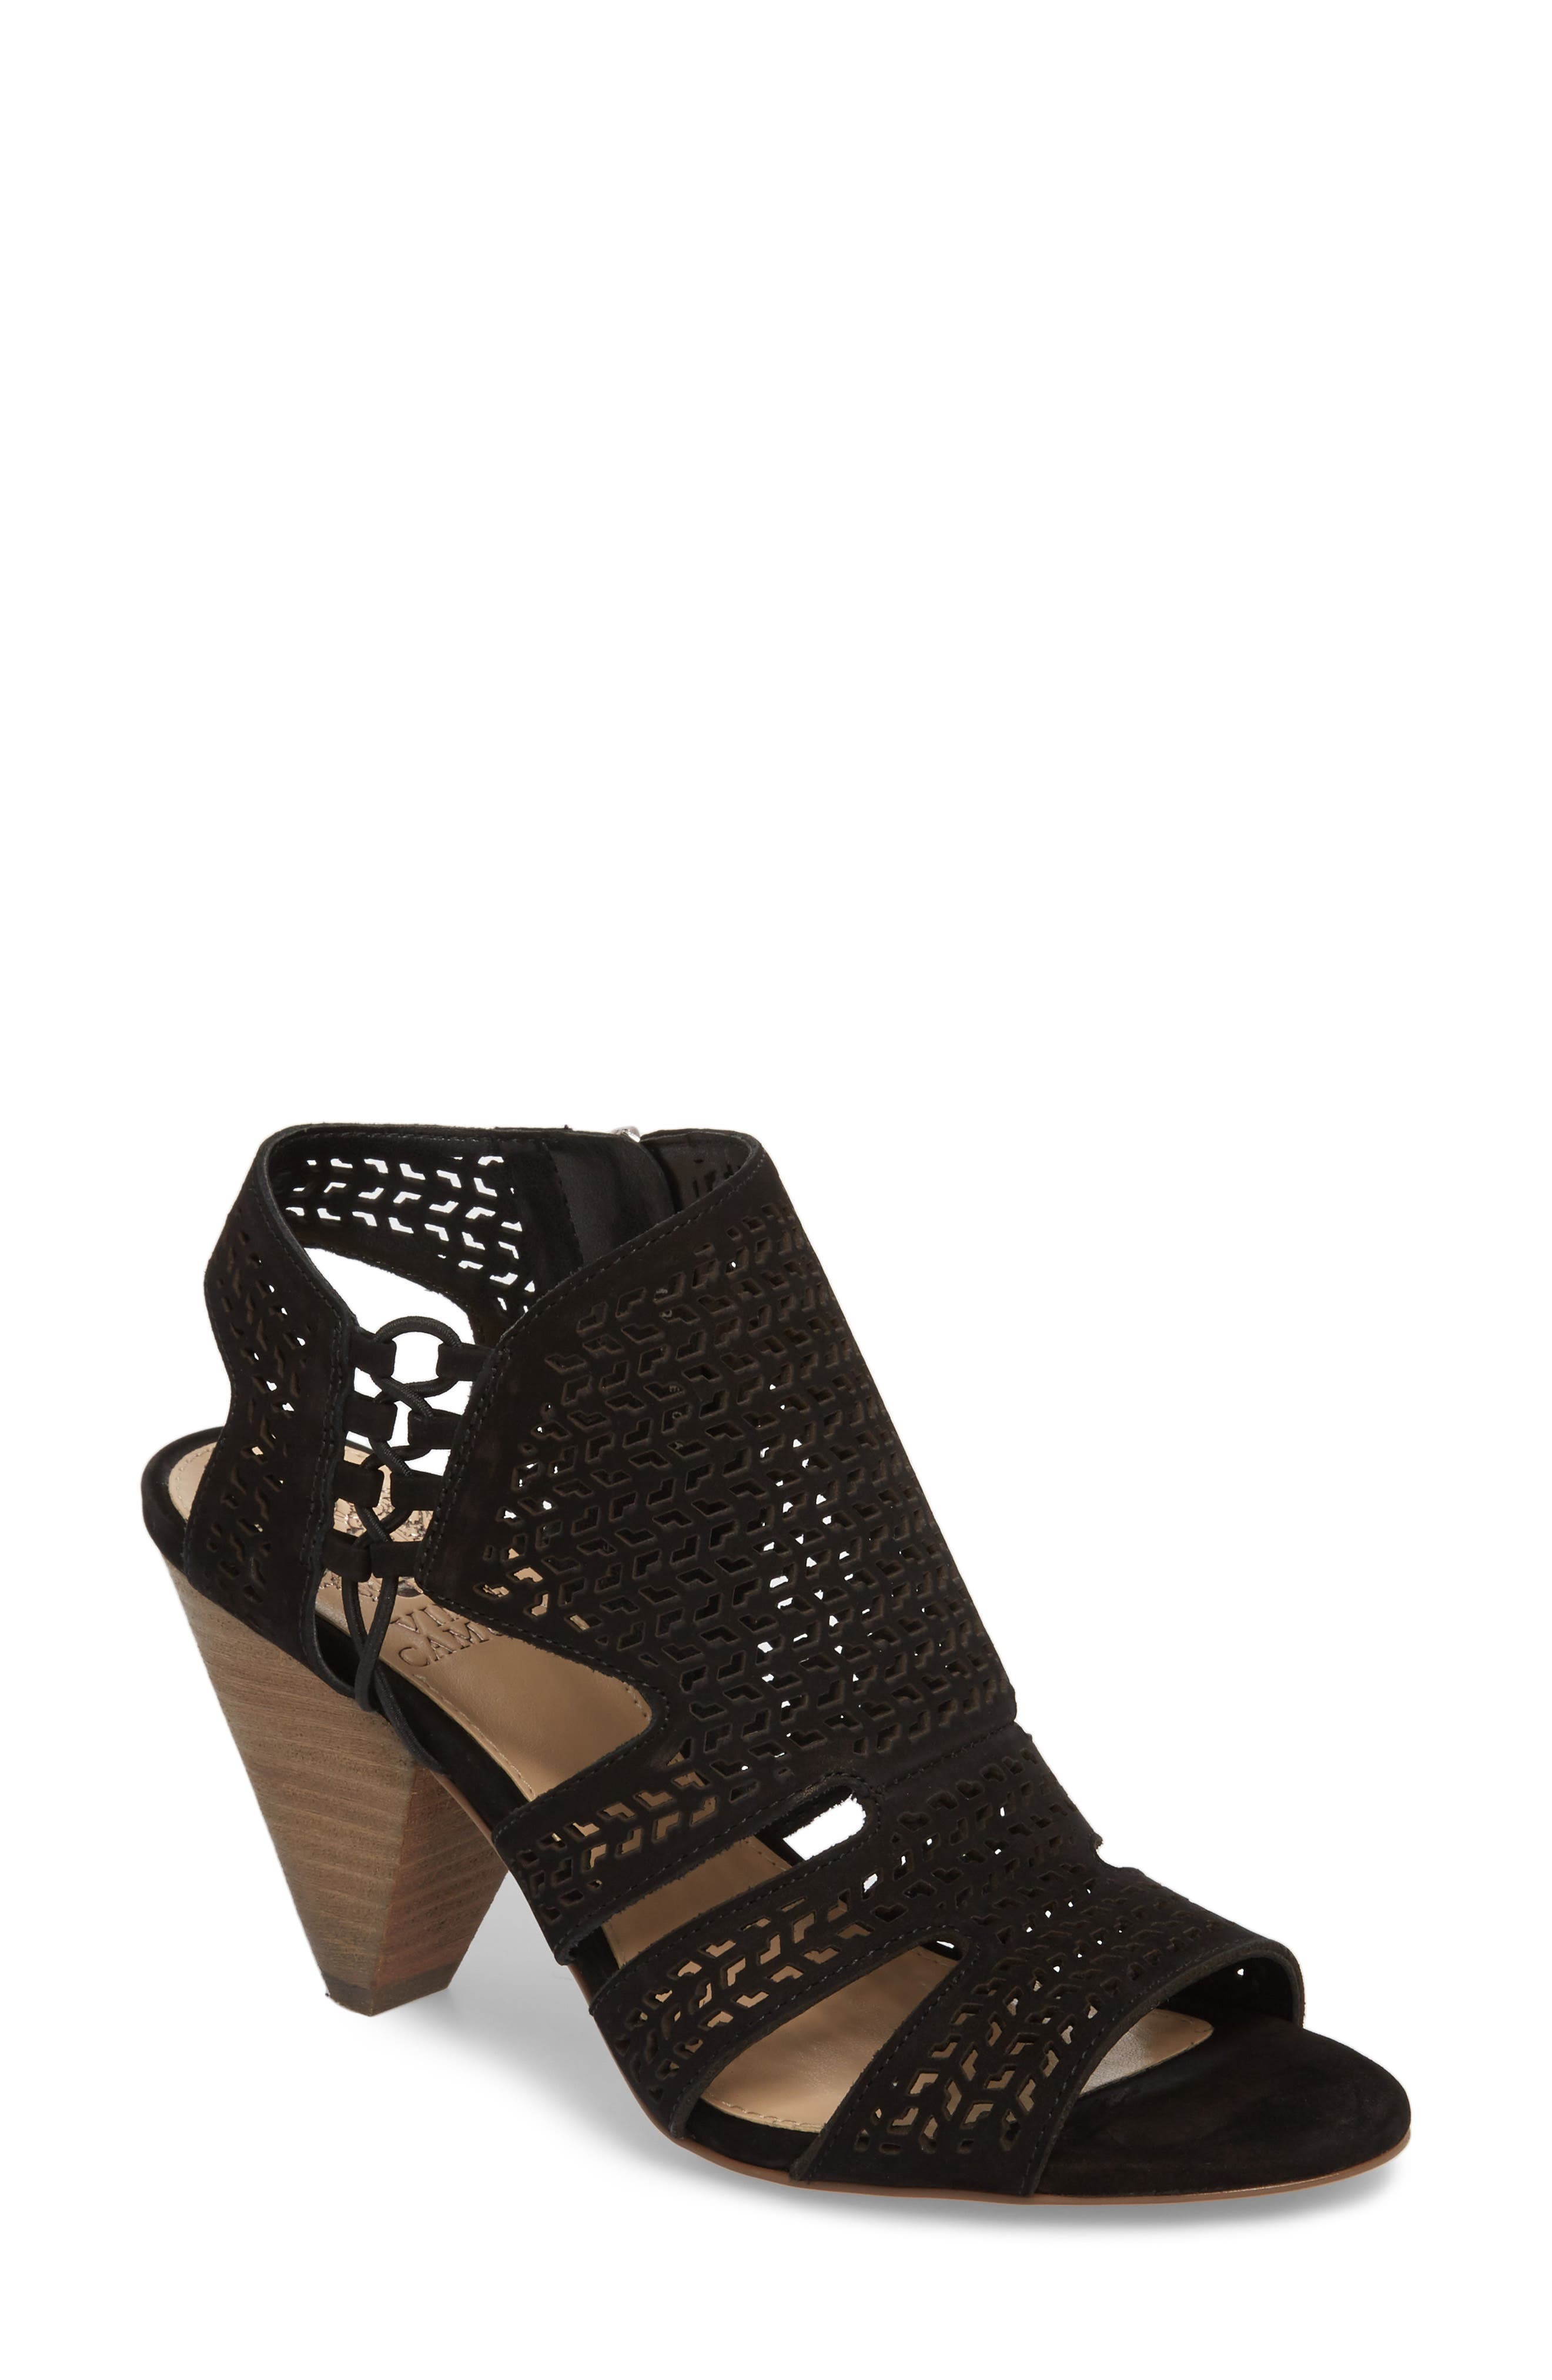 Vince Camuto Esten Perforated Sandal 